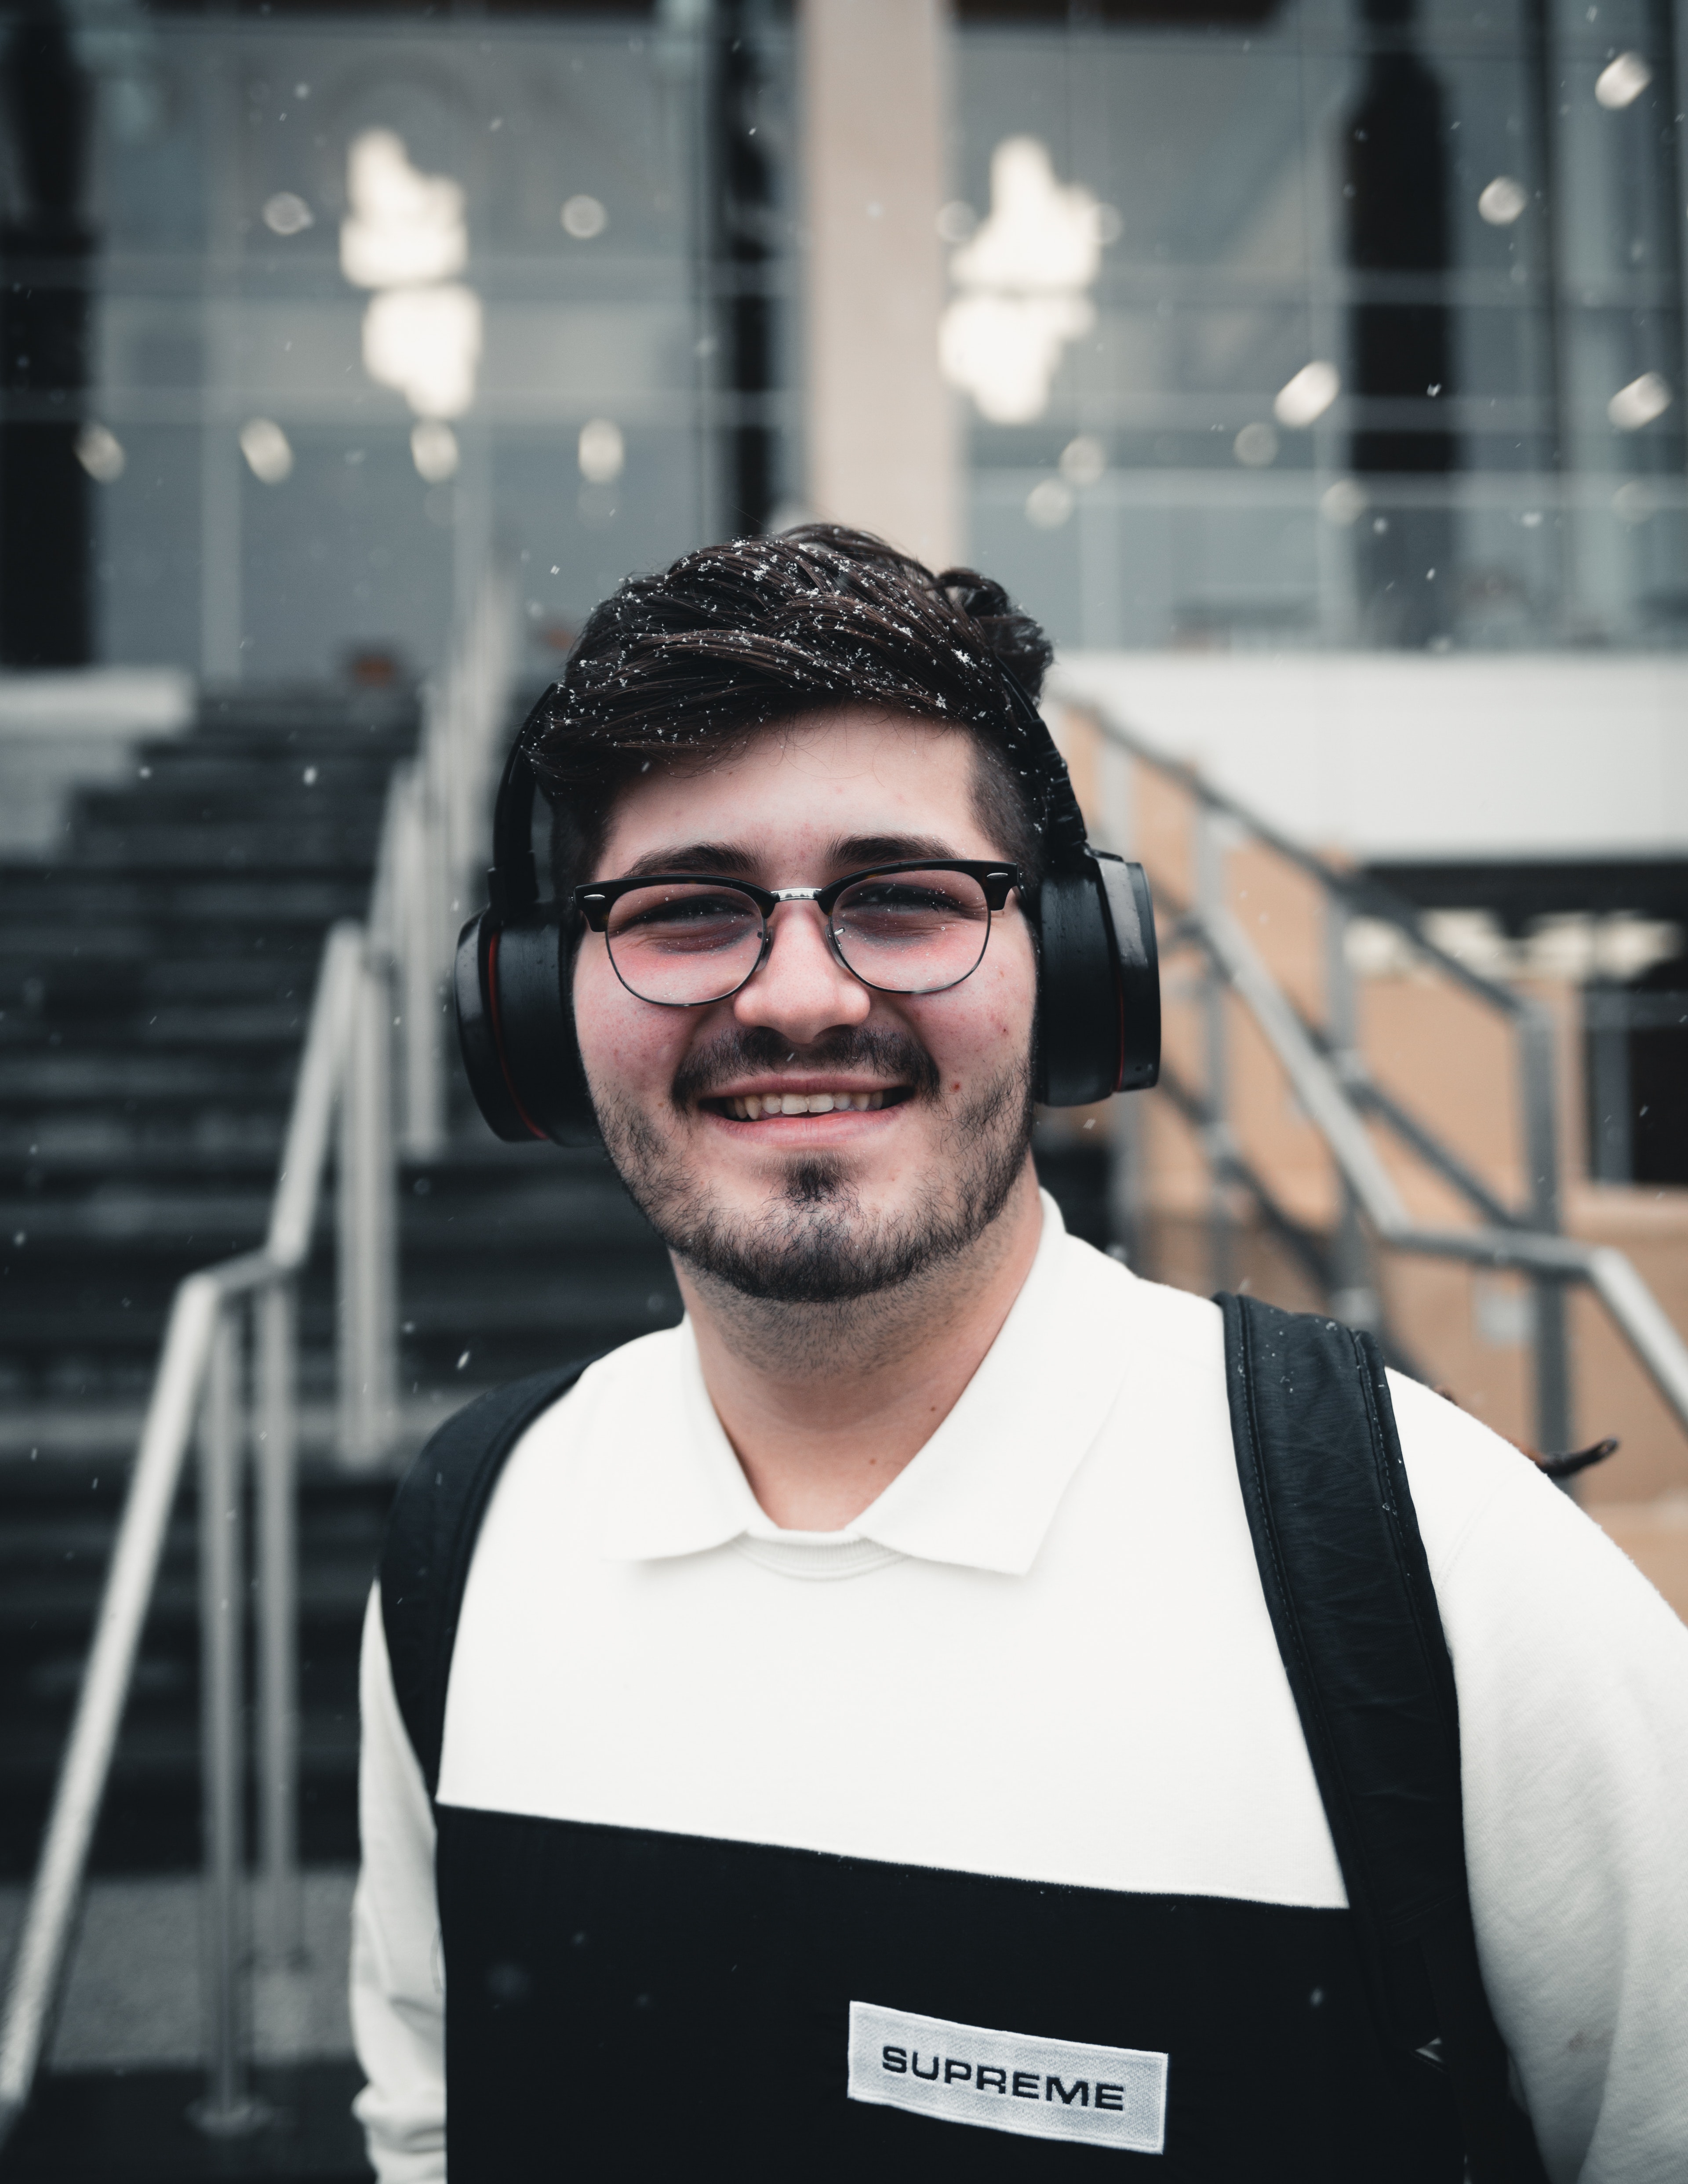 Man wearing headset and smiling photo